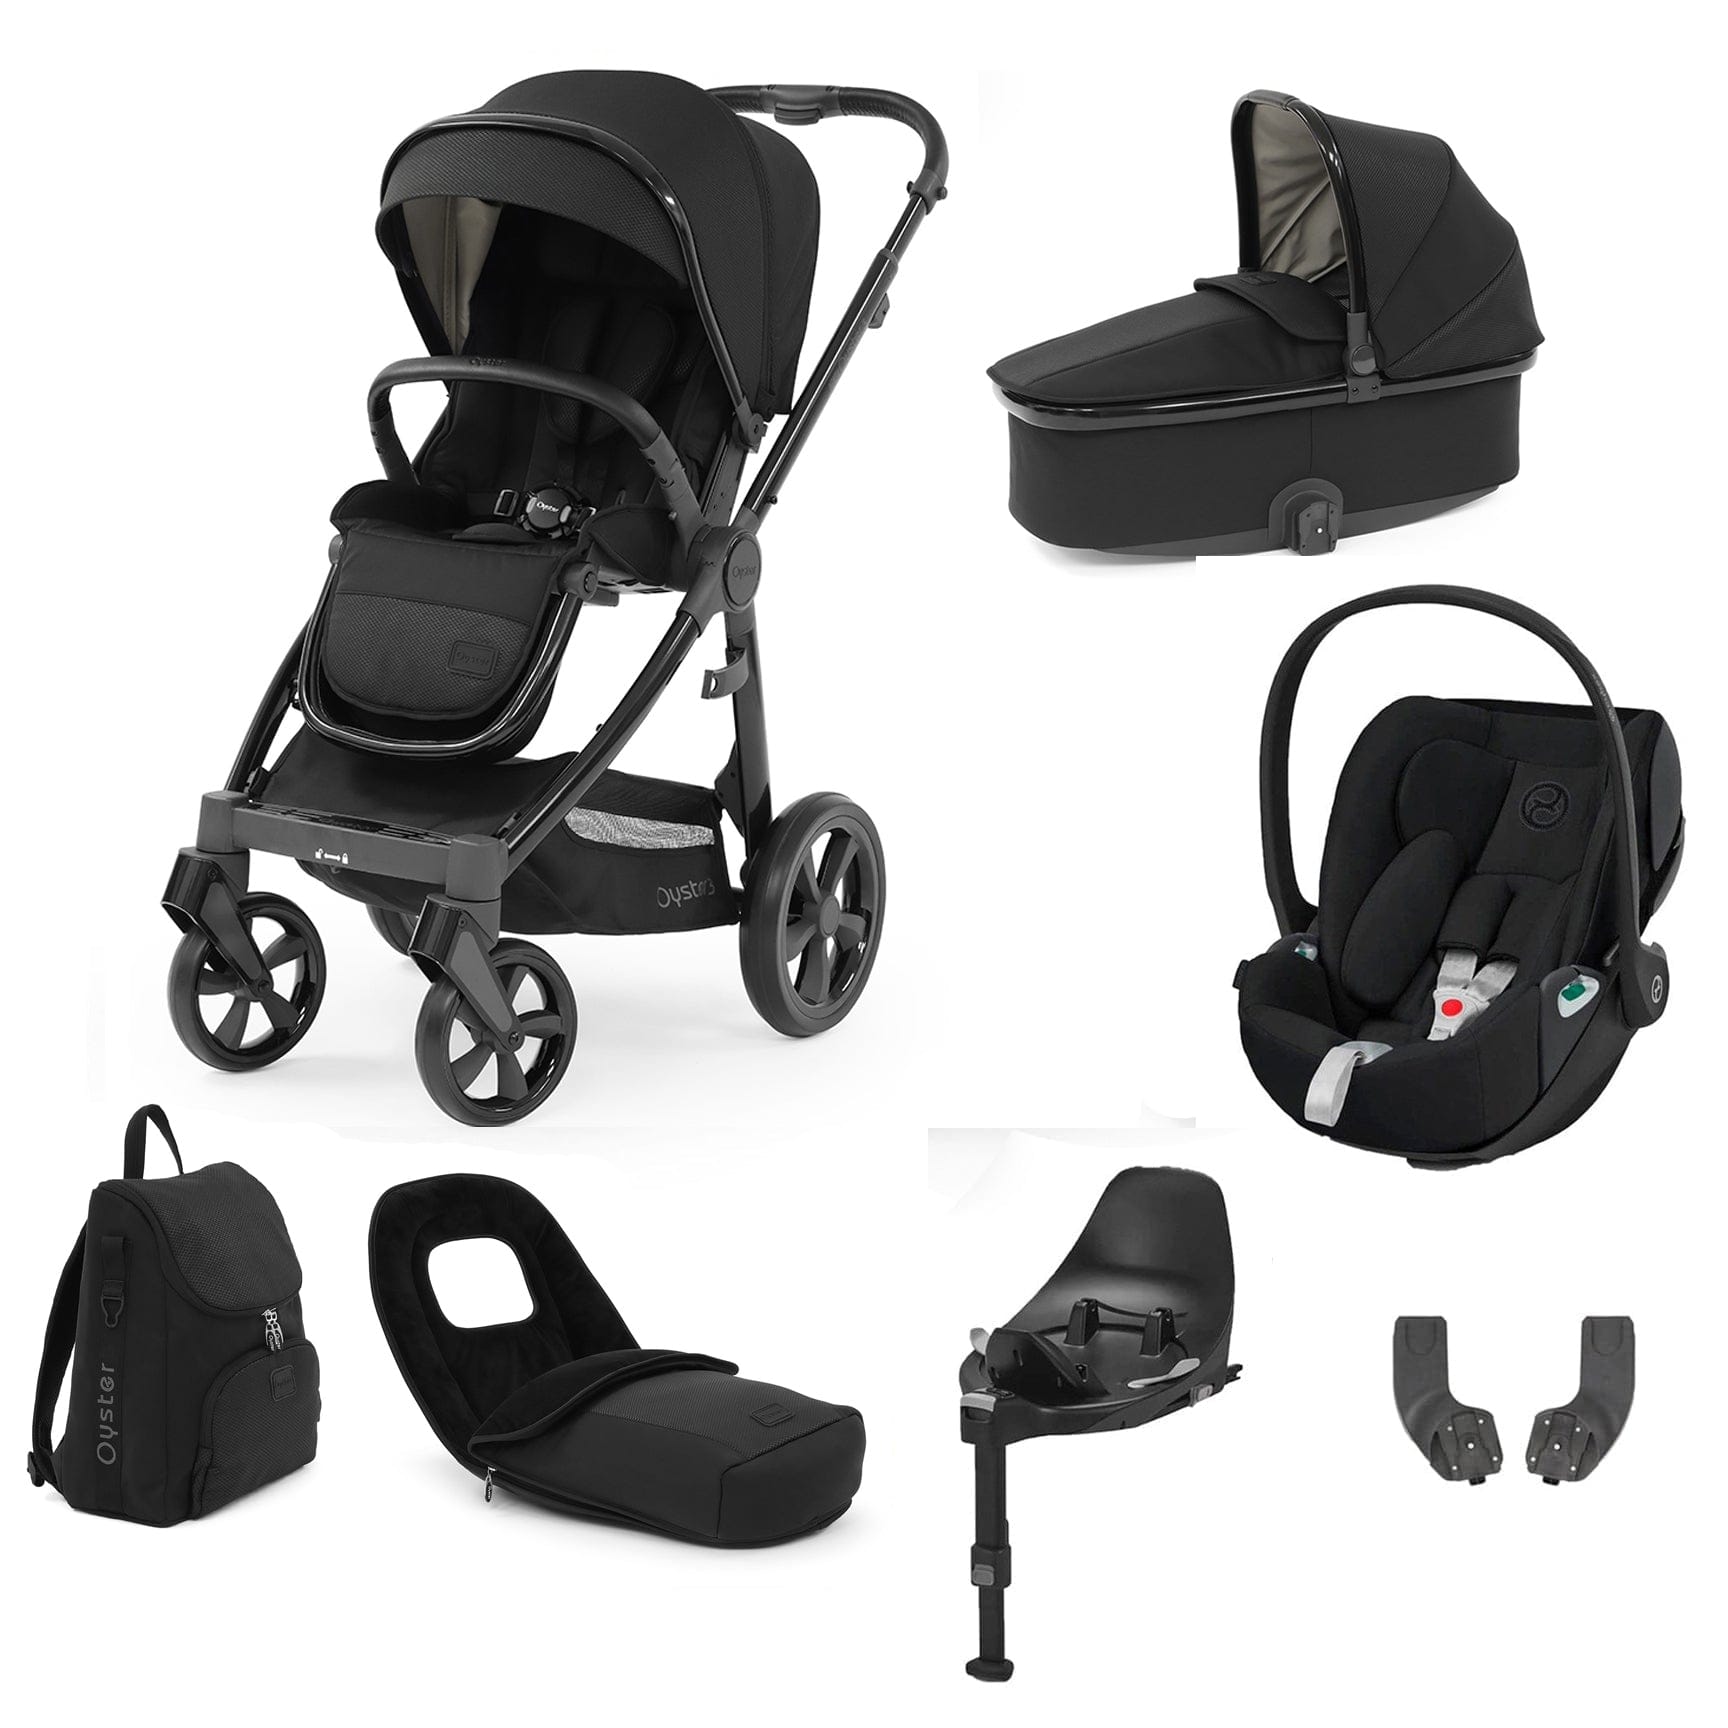 Babystyle Oyster 3 Luxury 7 Piece with Car Seat Bundle in Pixel Travel Systems 14801-PXL 5060711565668